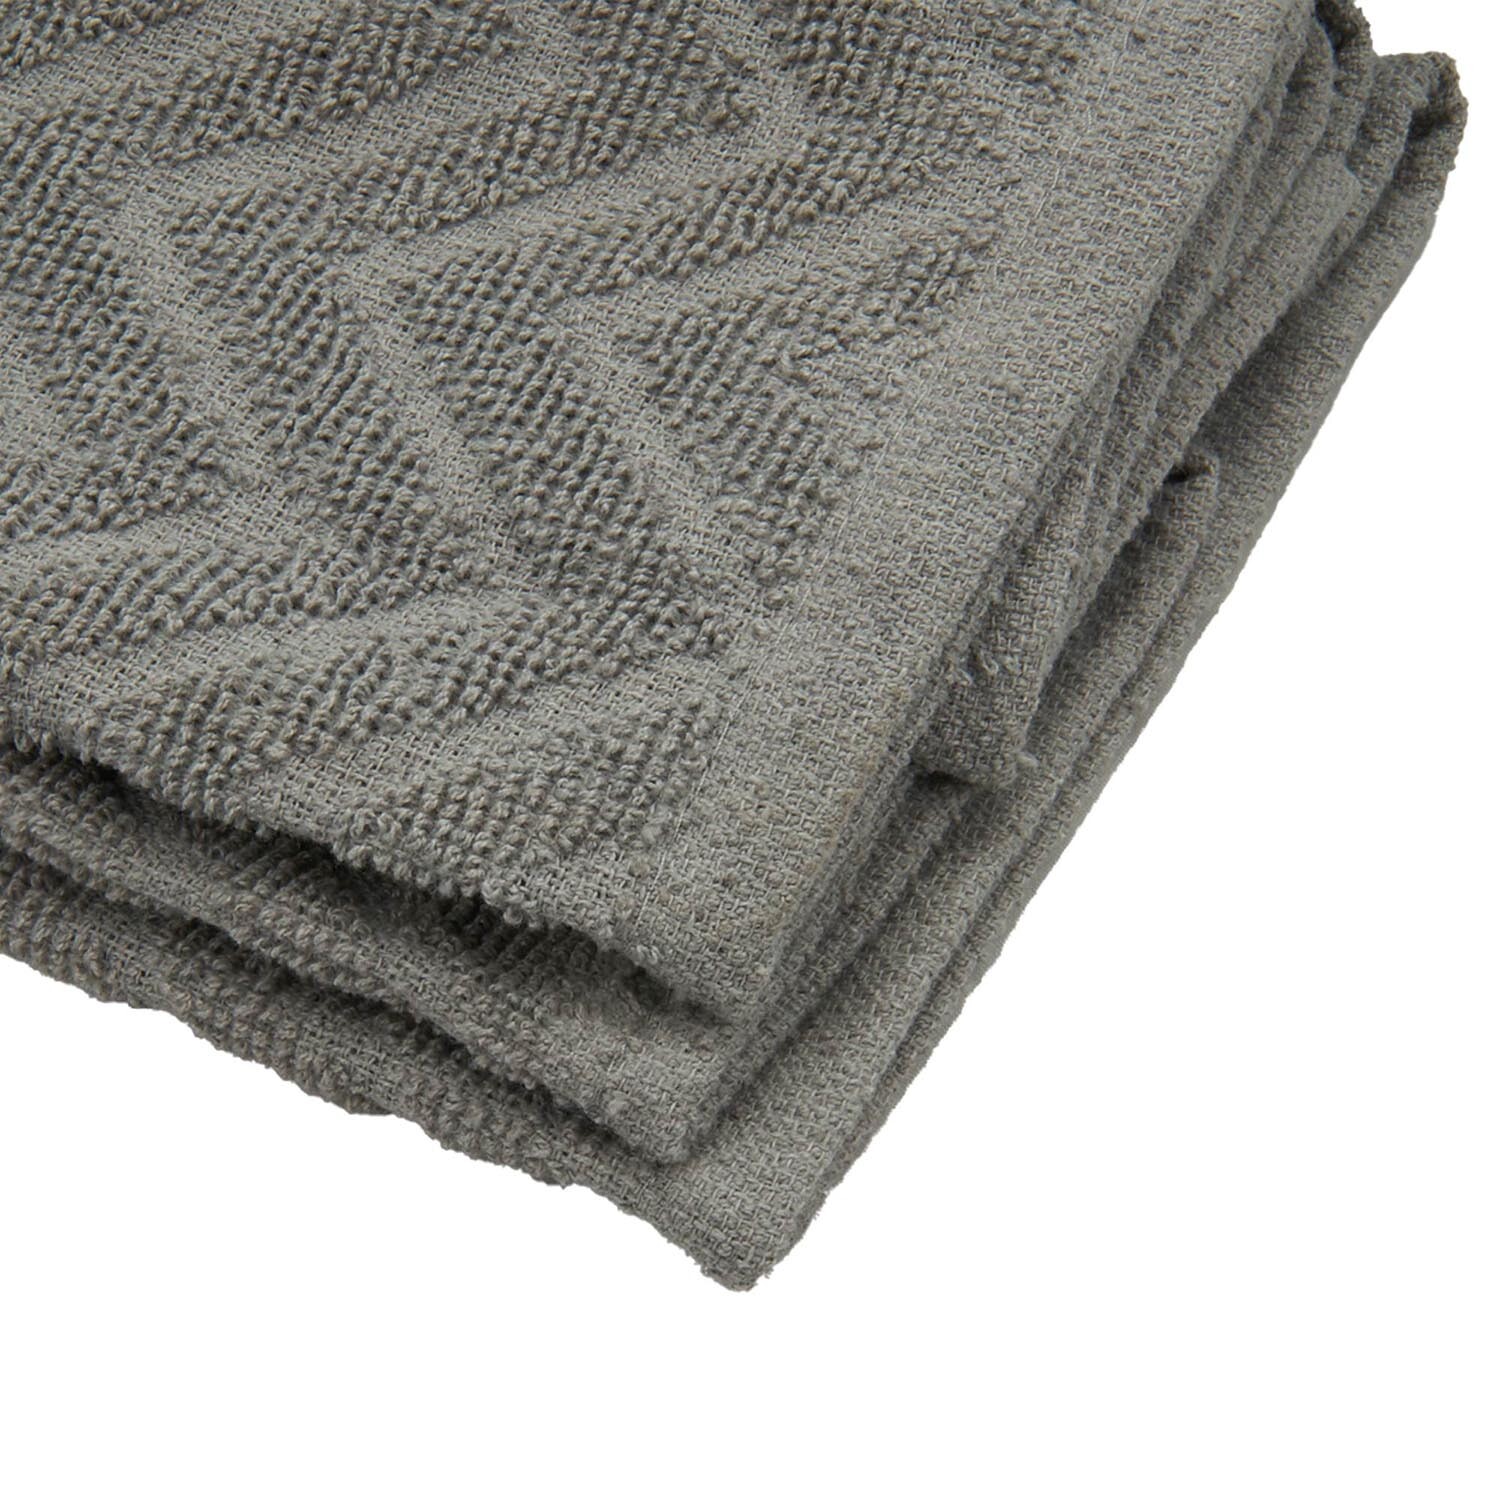 Pack of 2 Jacquard Terry Kitchen Towels - Light Grey Image 4